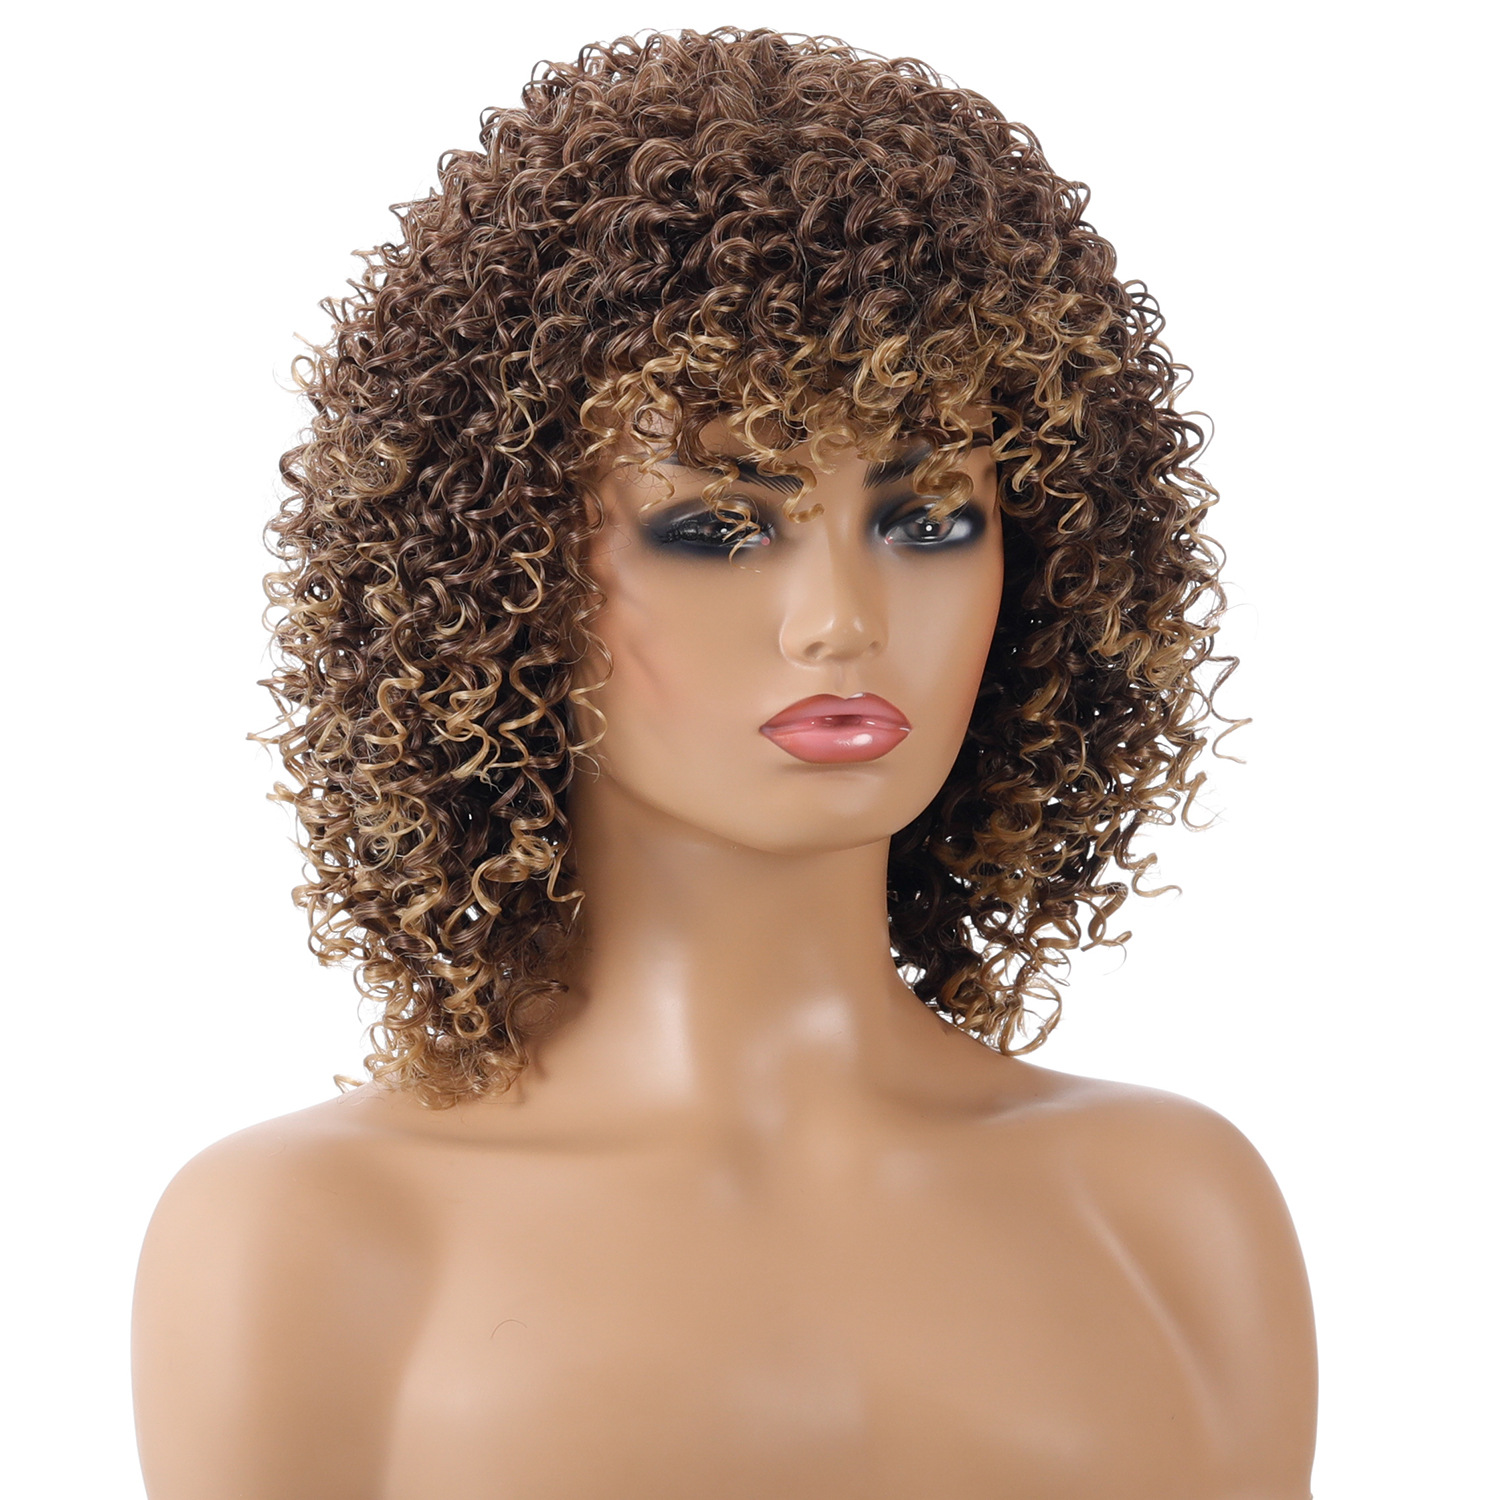 A synthetic wig featuring vibrant multicolor small curly hair